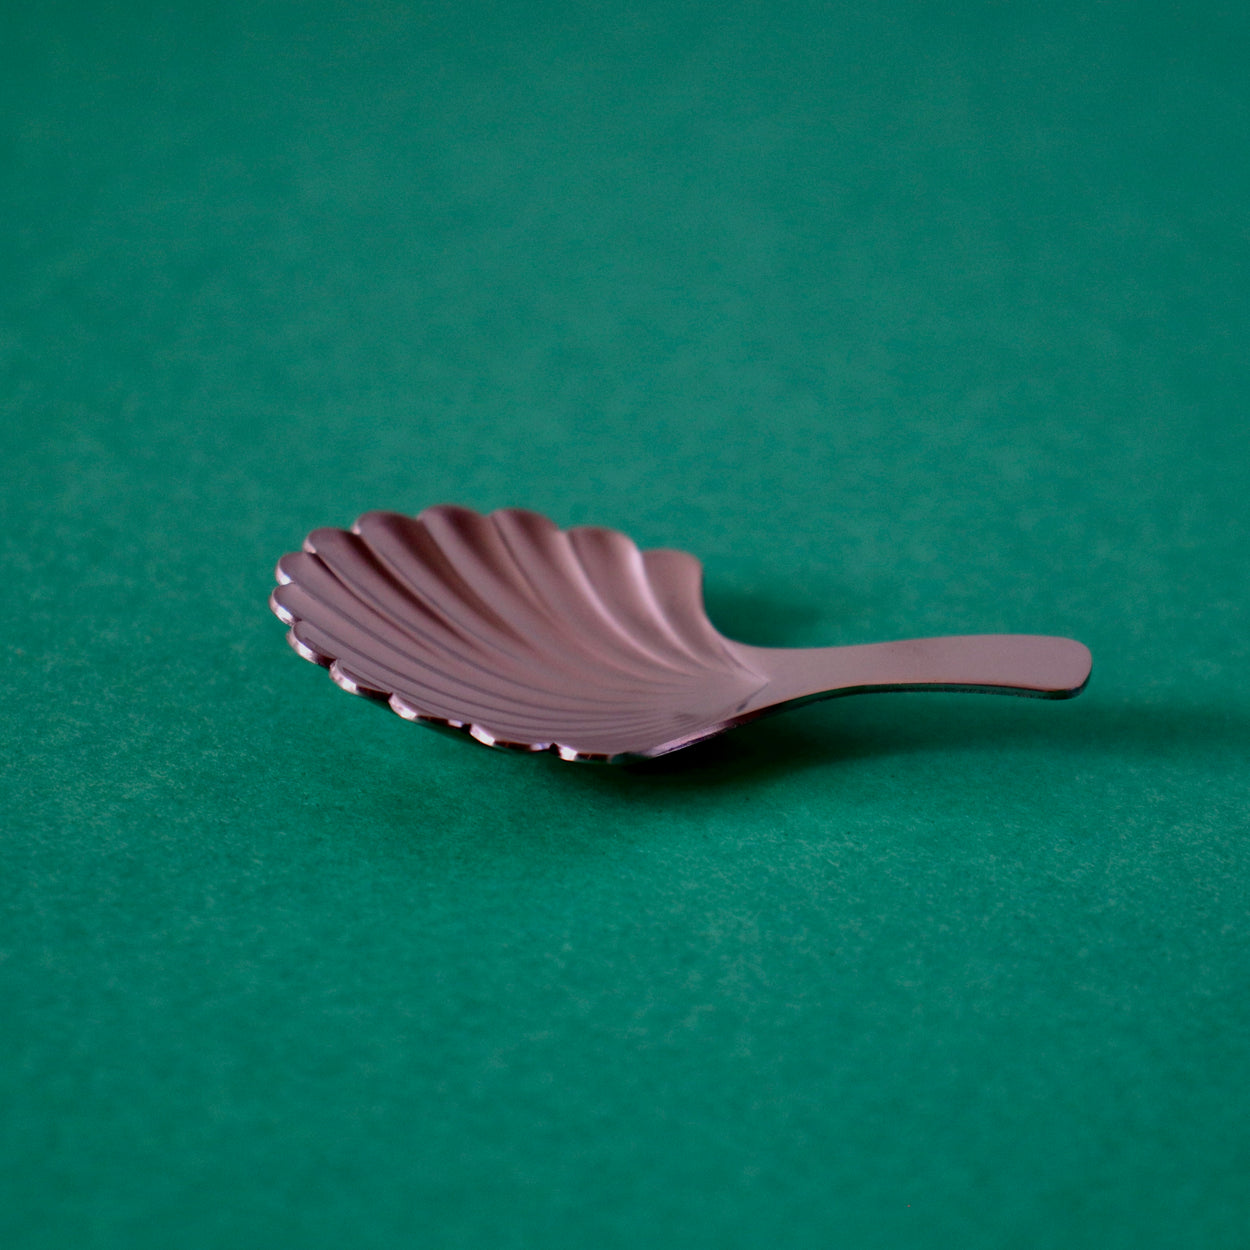 Side profile Japanese Shell Tea Spoon on a green background.